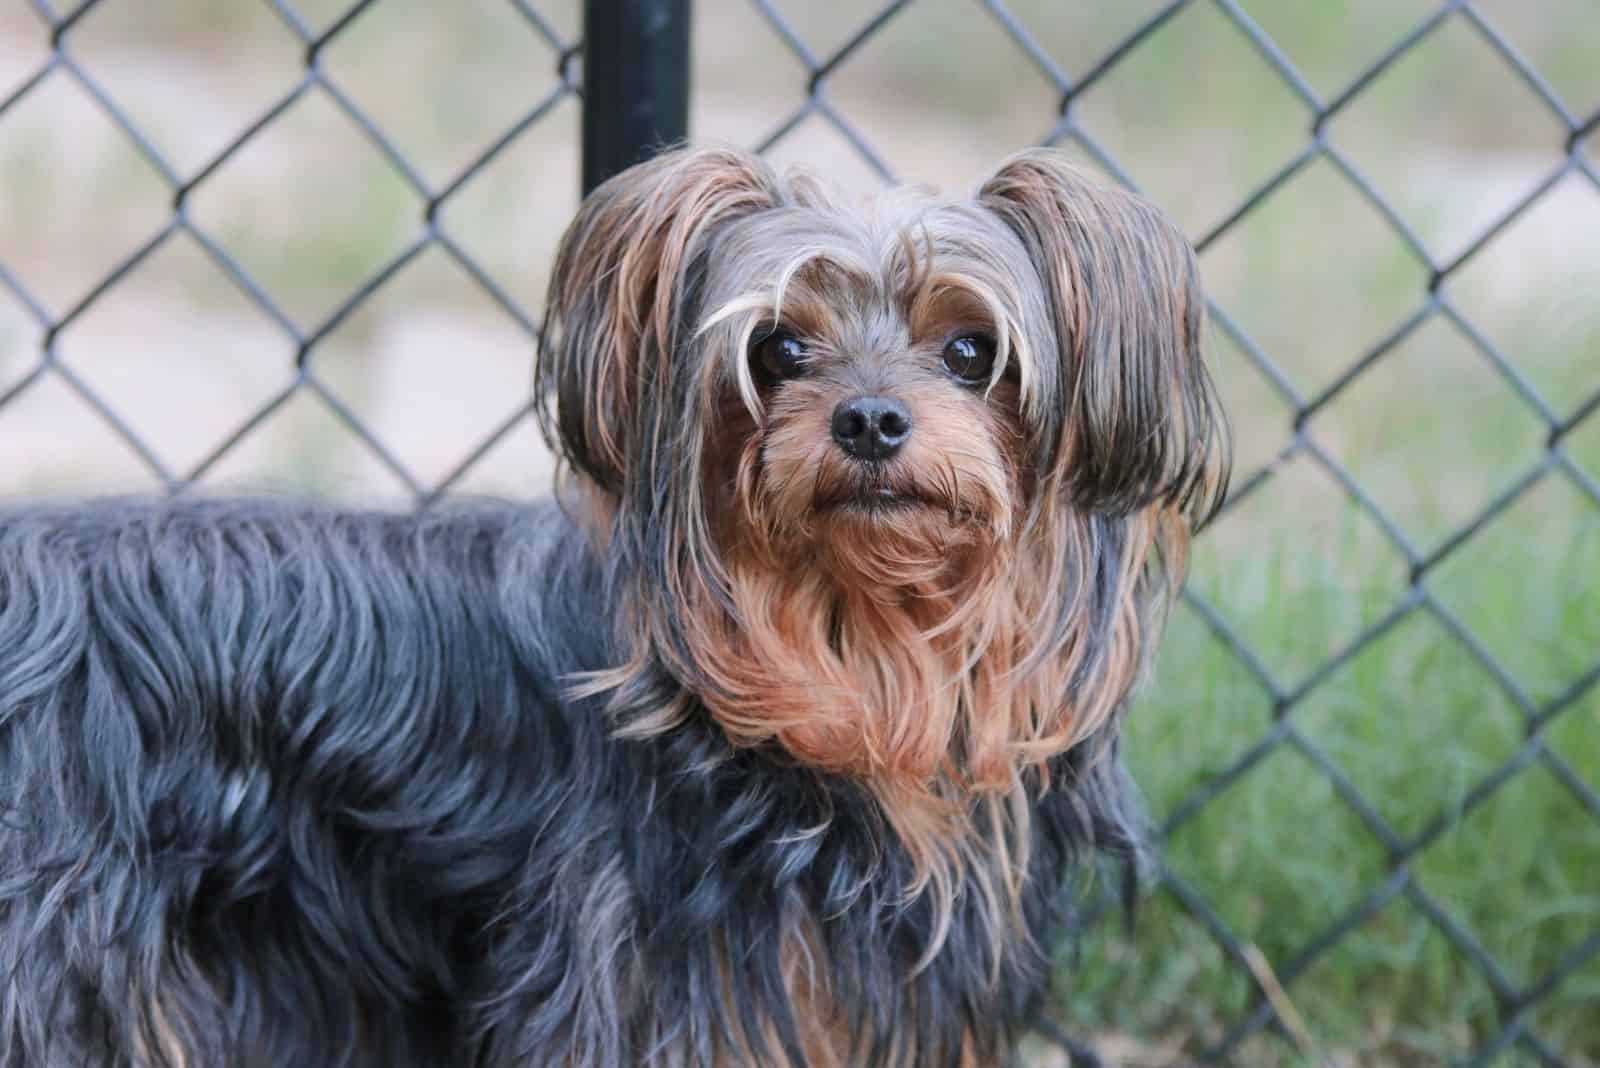 adorable yorkie poo standing near the chain link fence